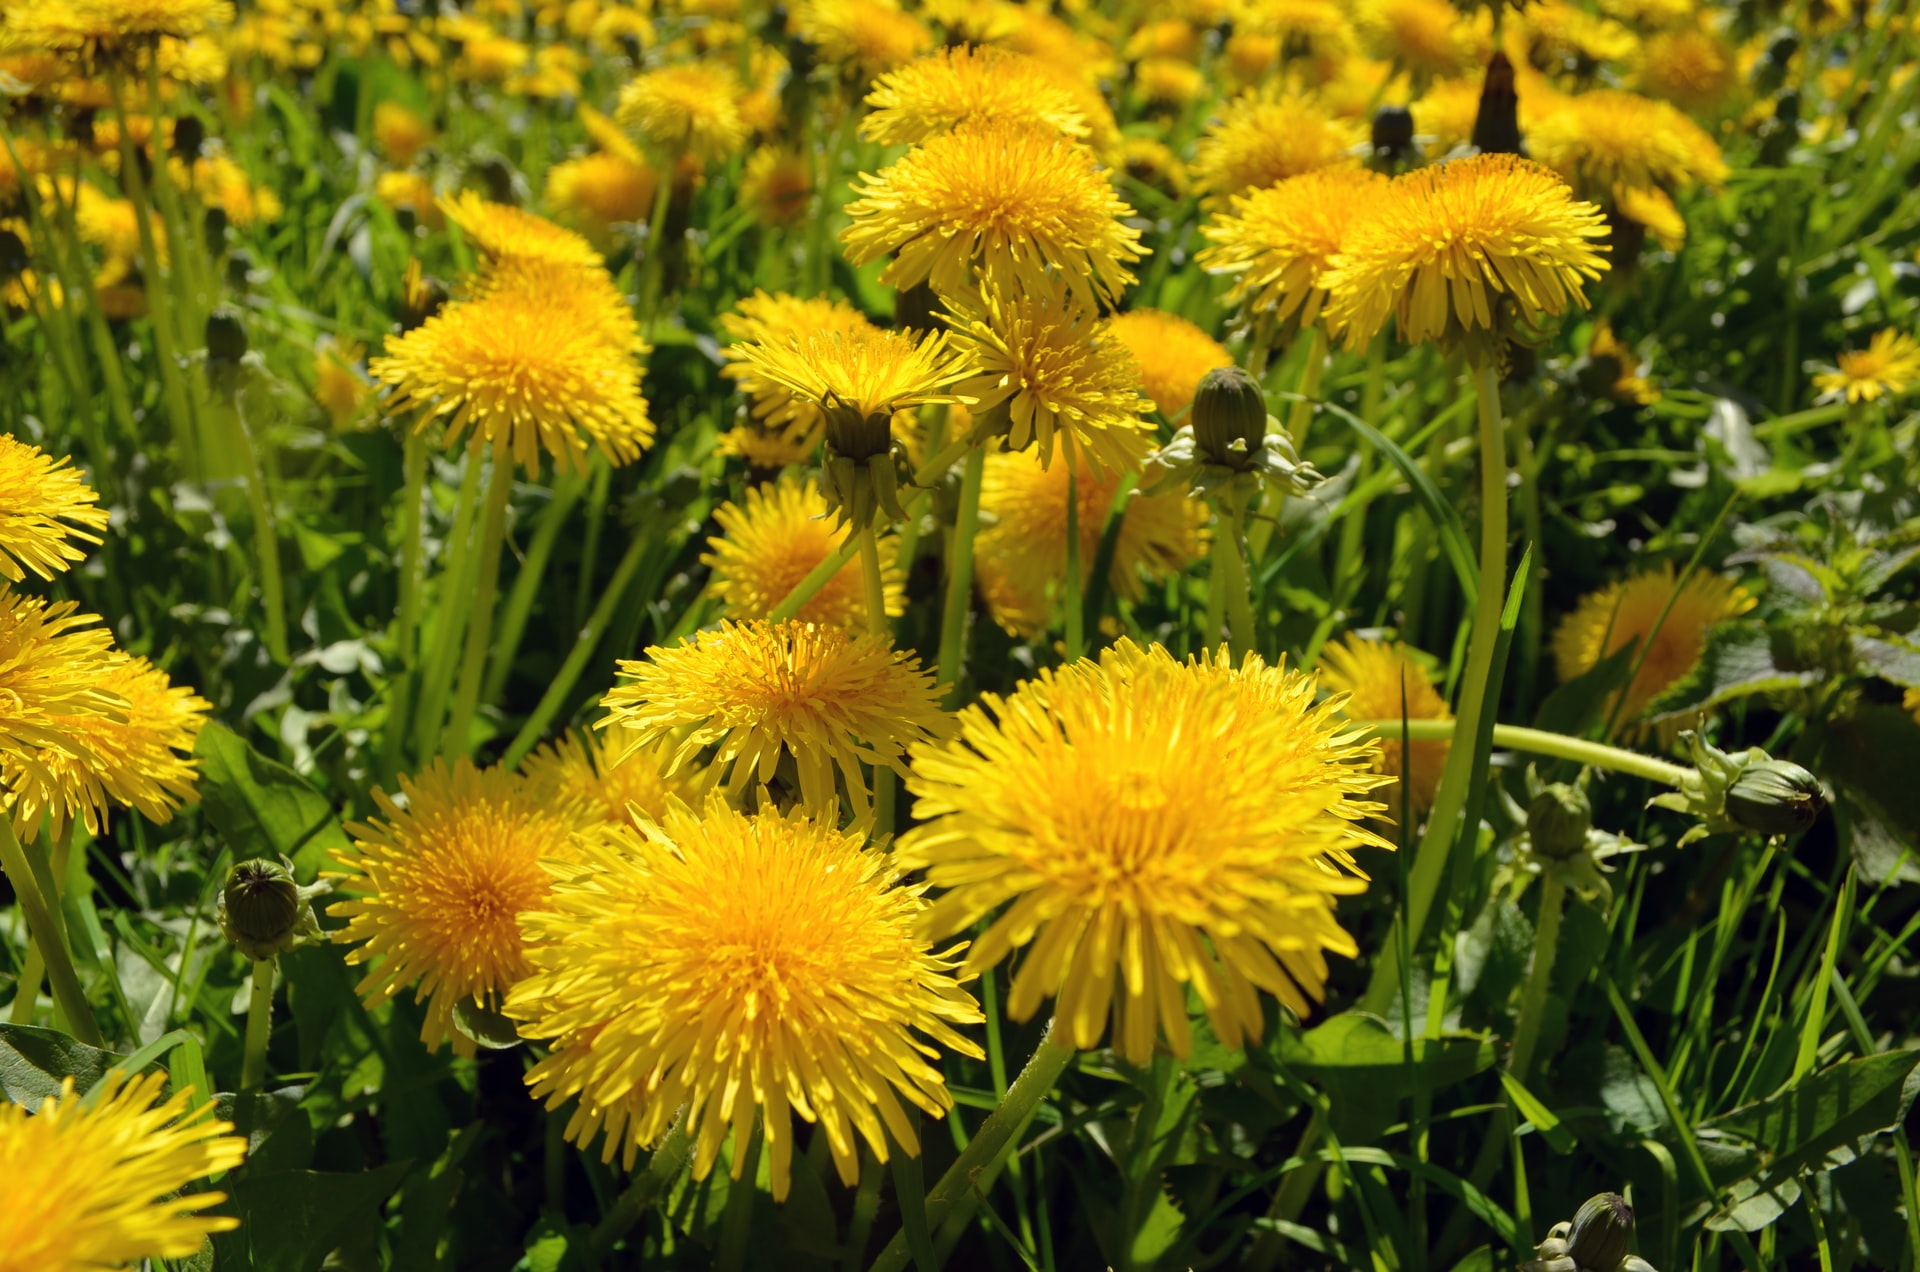 Learn how to use landscape fabric and minimize problem weeds like these yellow dandelions.